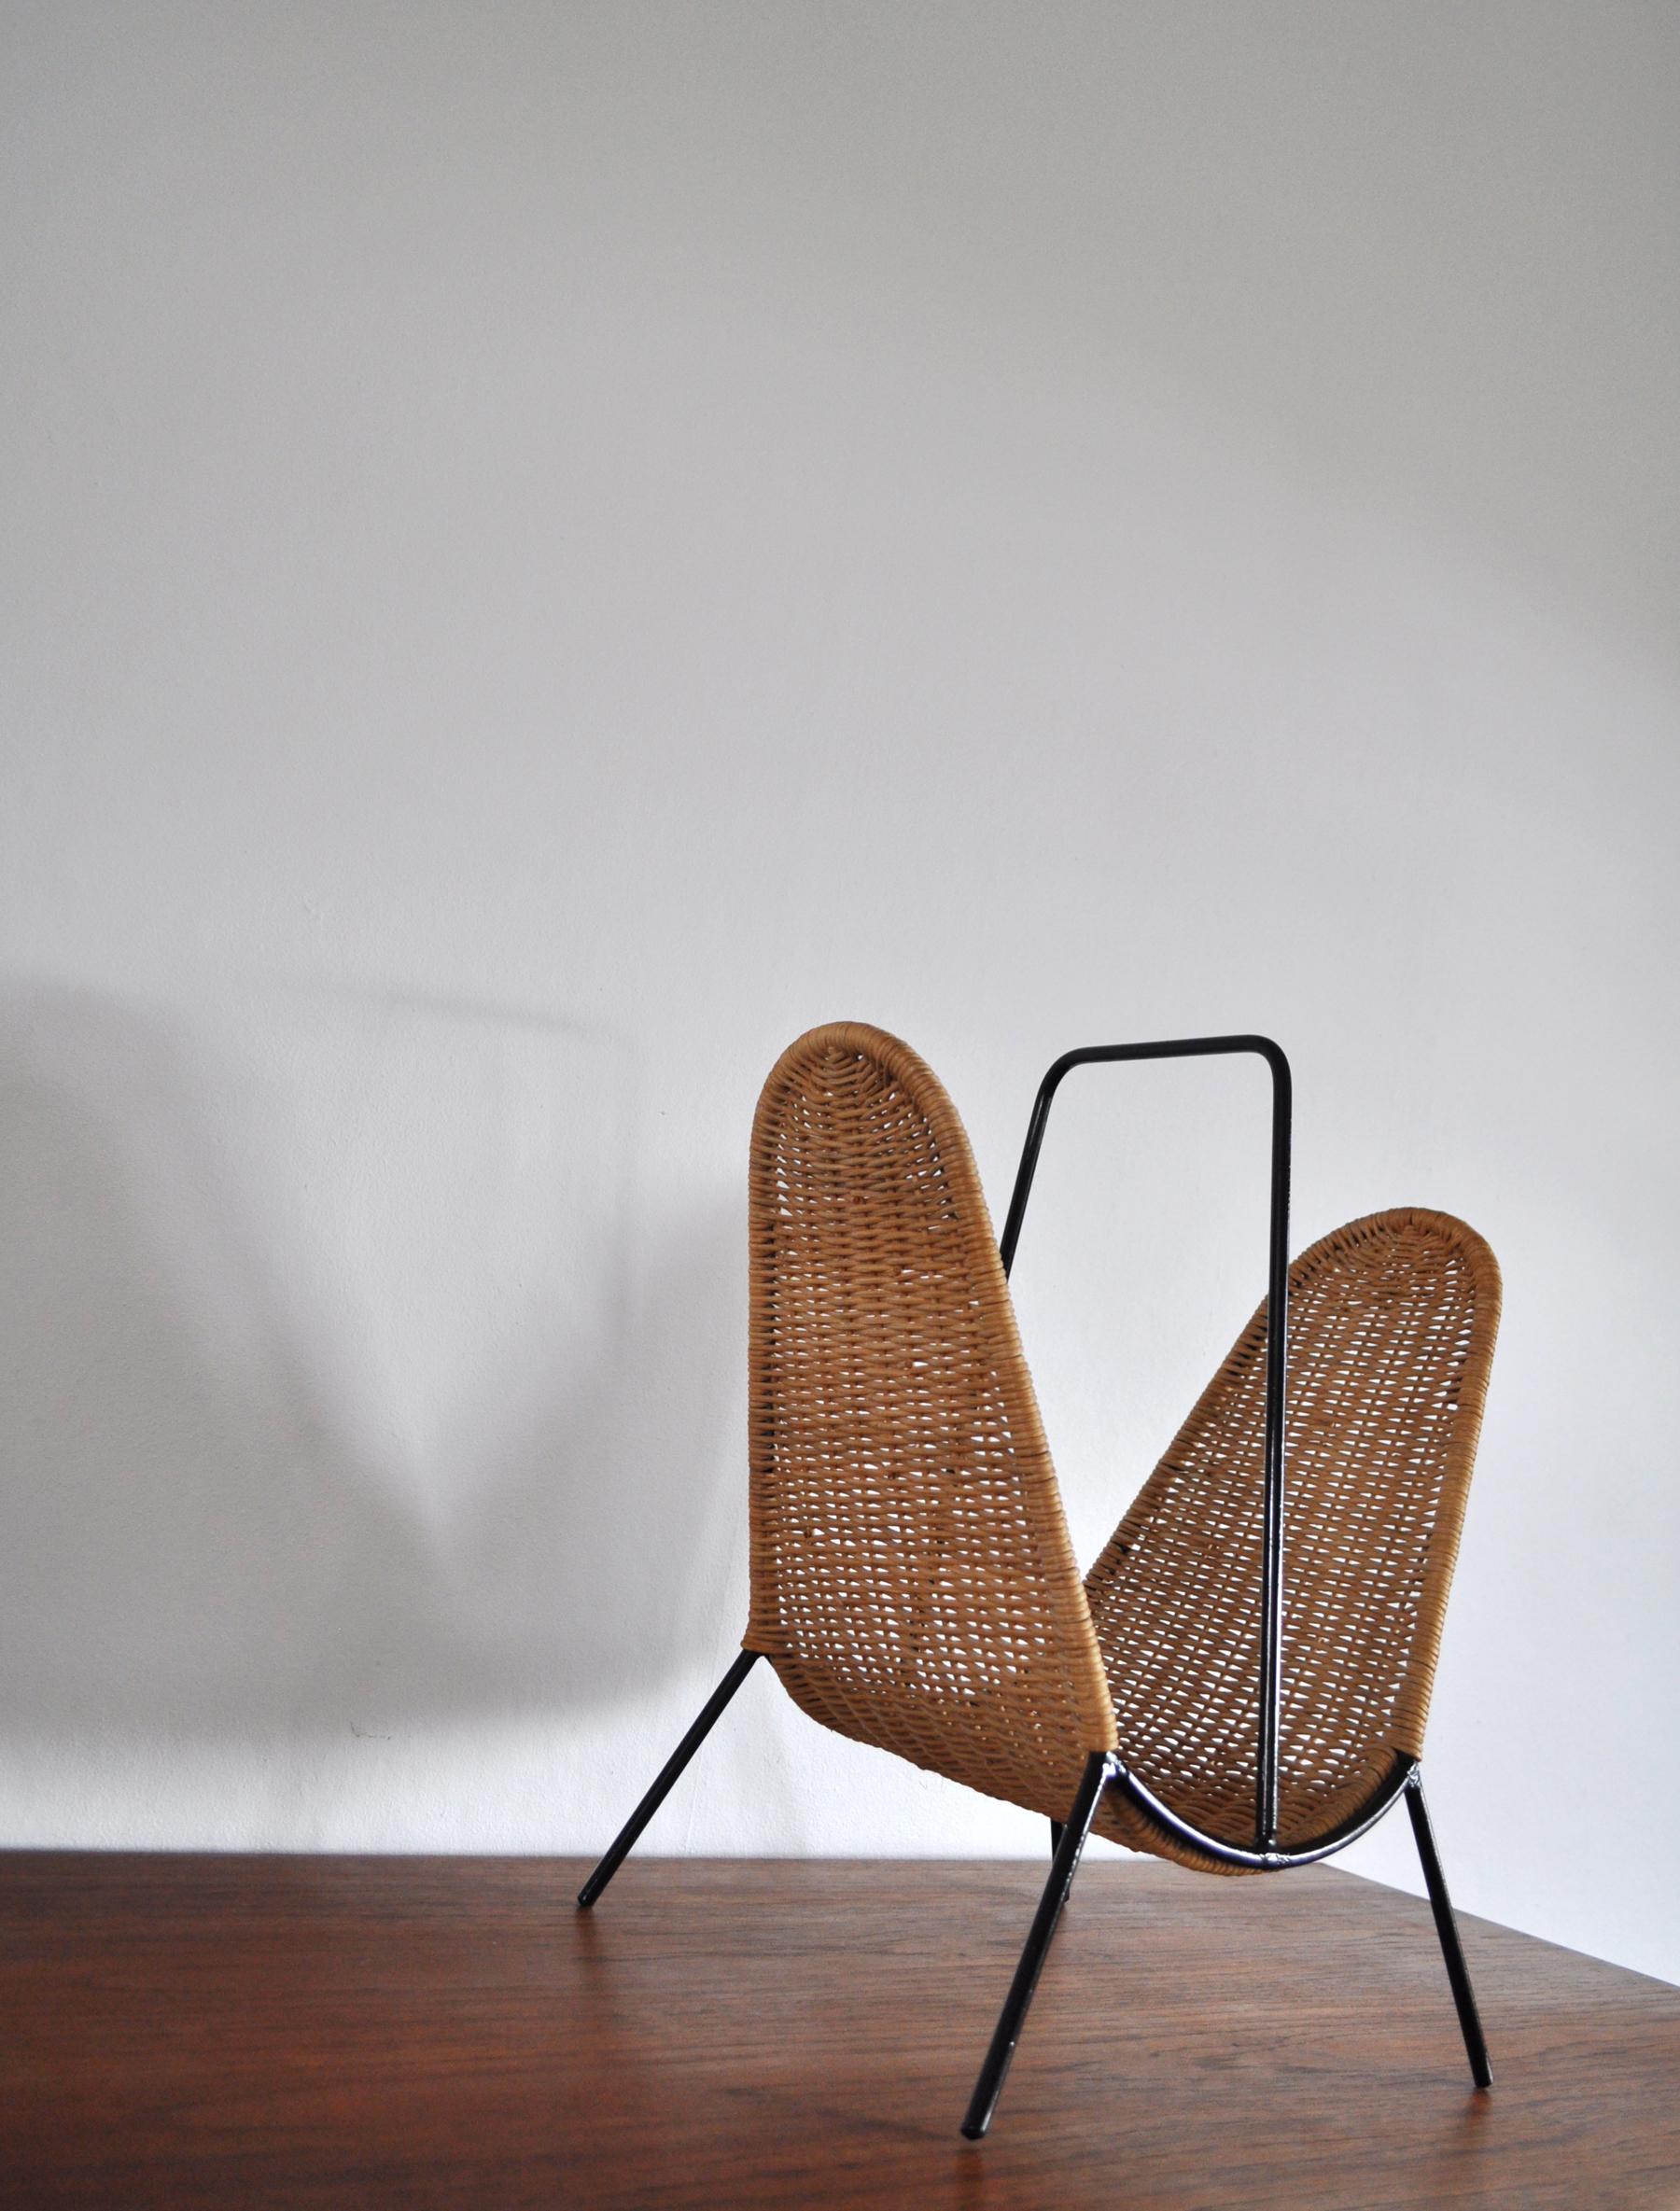 20th Century Danish Modern Rattan Magazine Rack attributed to Carl Auböck, 1960s For Sale